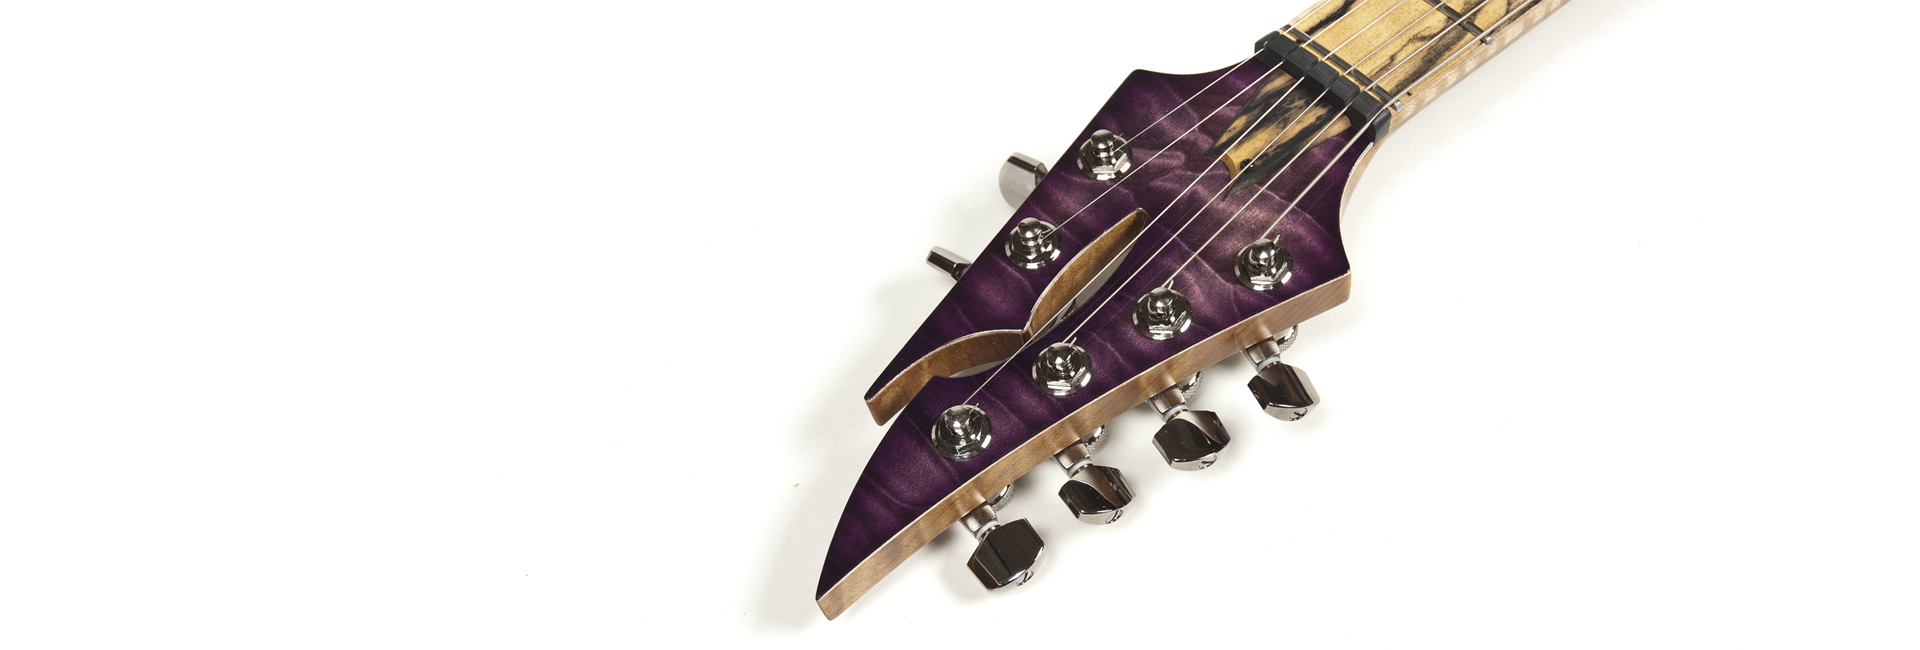 Equilibrium 6-string "split" headstock with a quilt maple purpleburst gloss finish on a roasted flame maple neck with a pale moon ebony fretboard and ruthenium Schaller locking M6 tuners